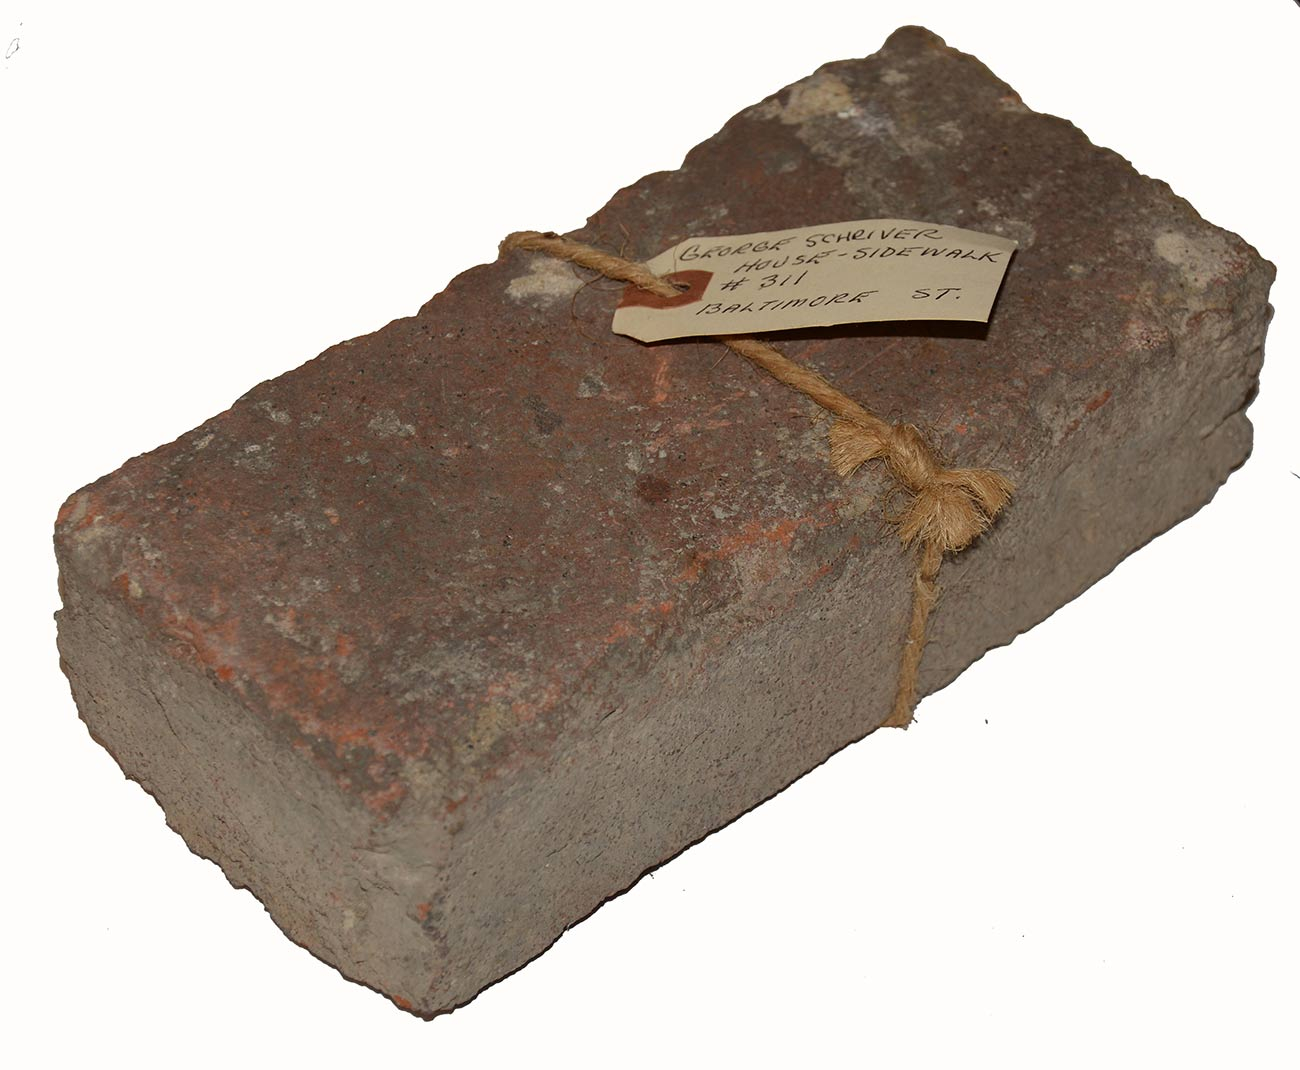 BRICK FROM THE SIDEWALK OF THE HISTORIC SHRIVER HOUSE ON BALTIMORE ST. IN GETTYSBURG